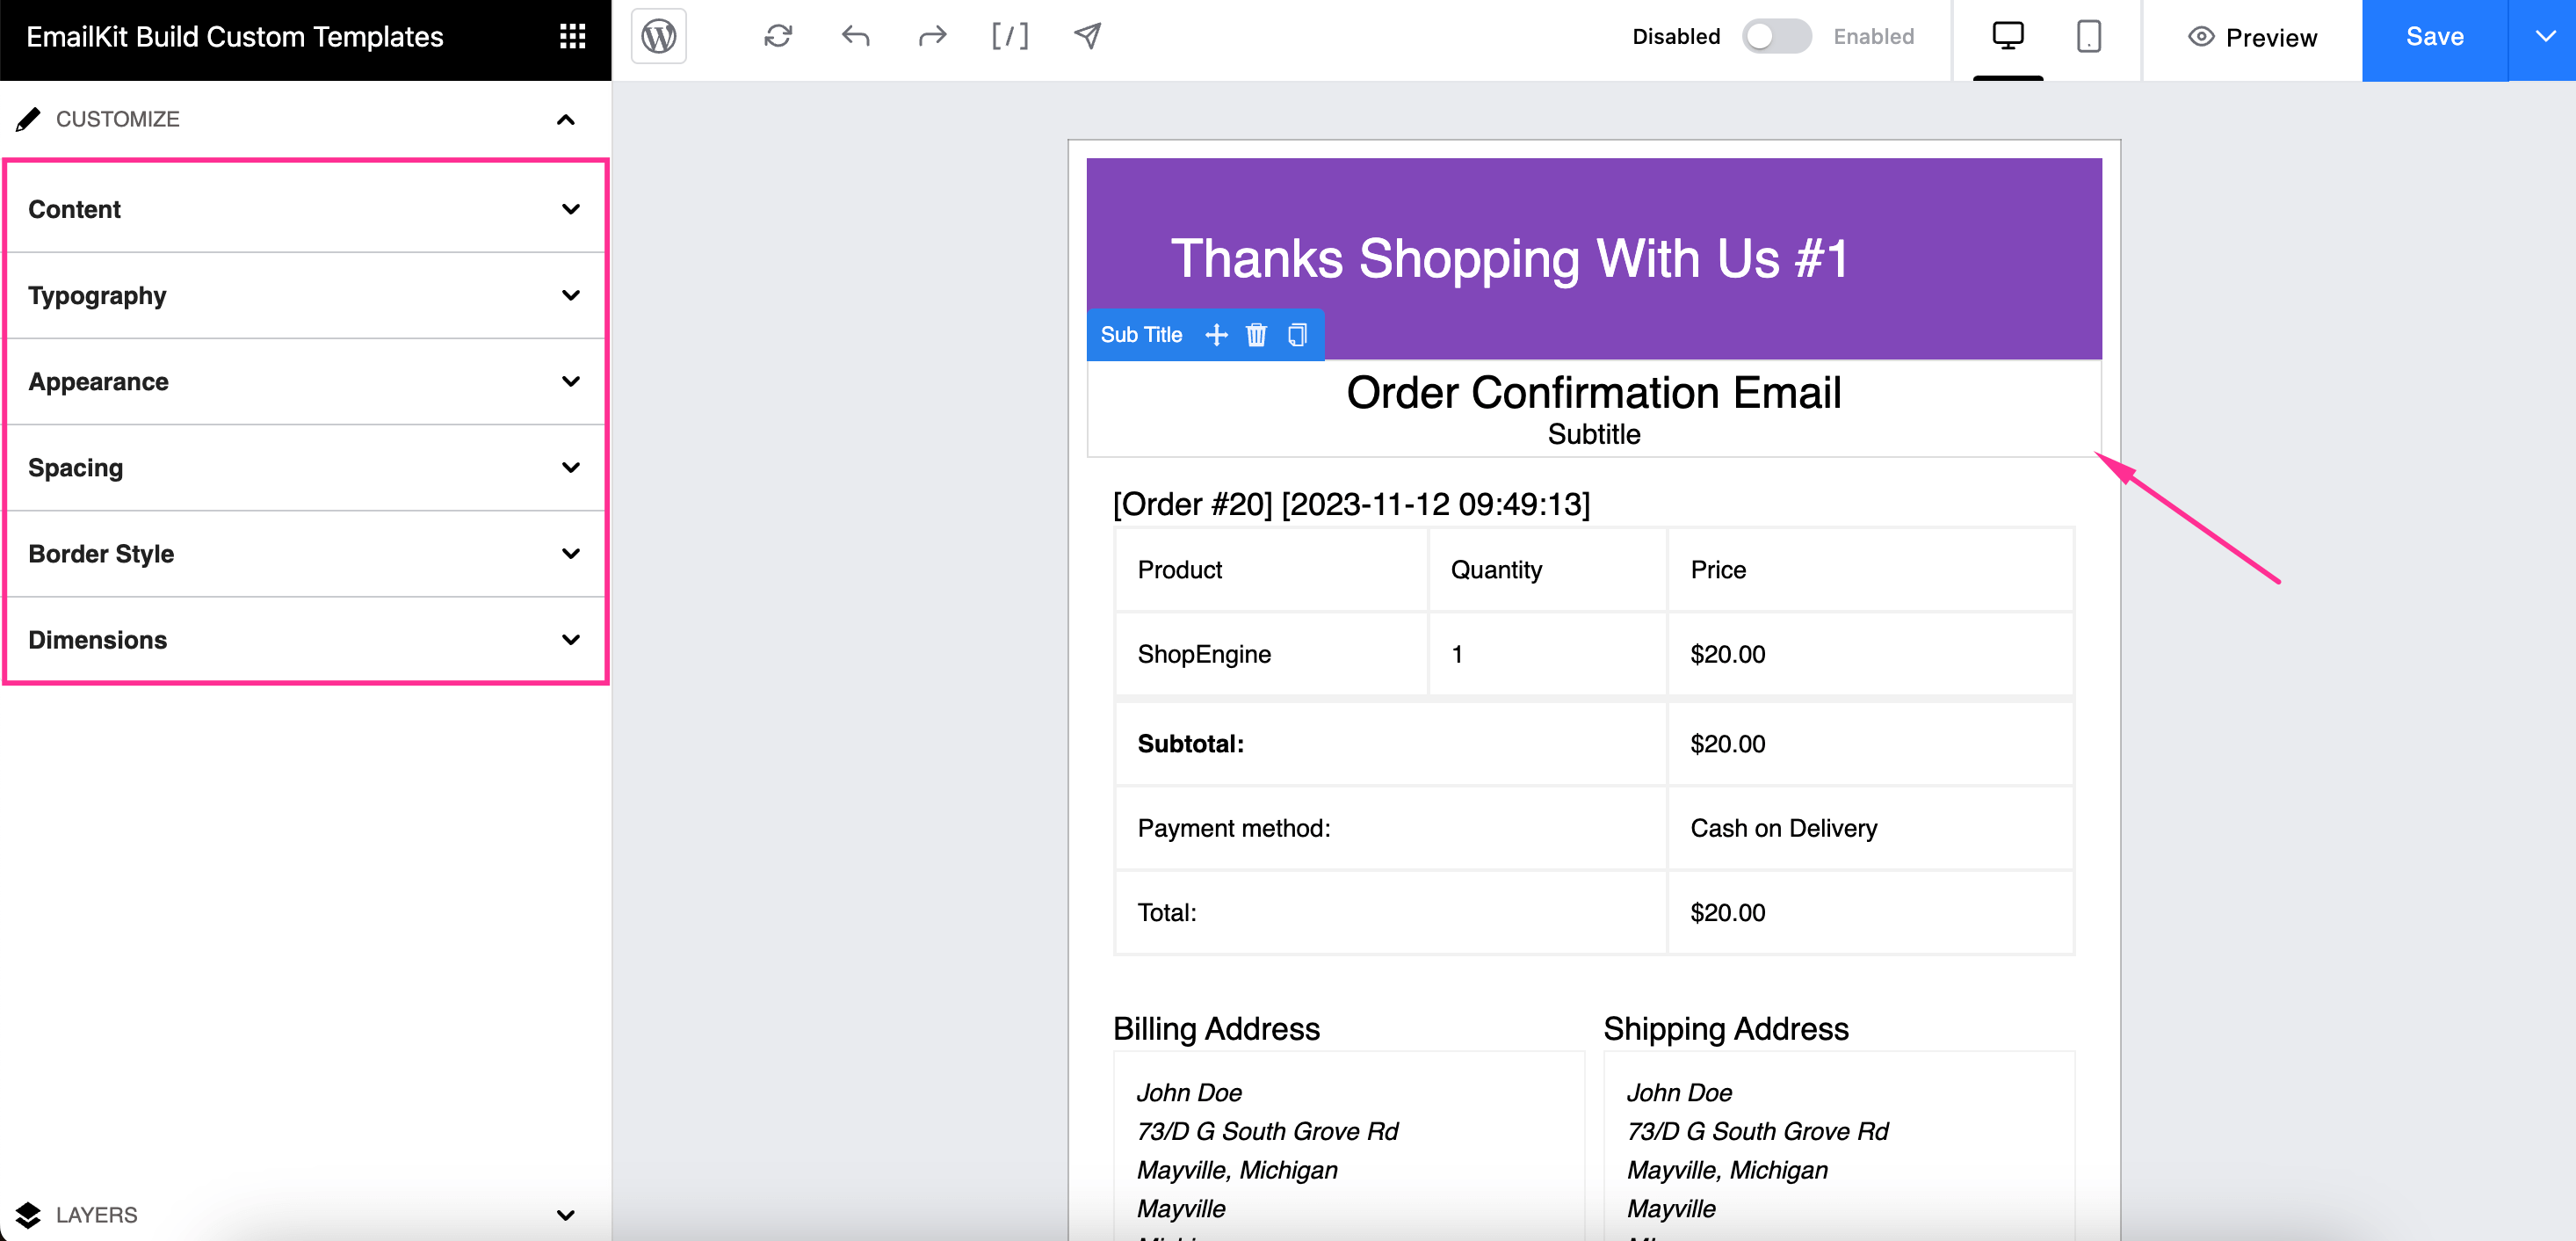 How to create custom completed order email